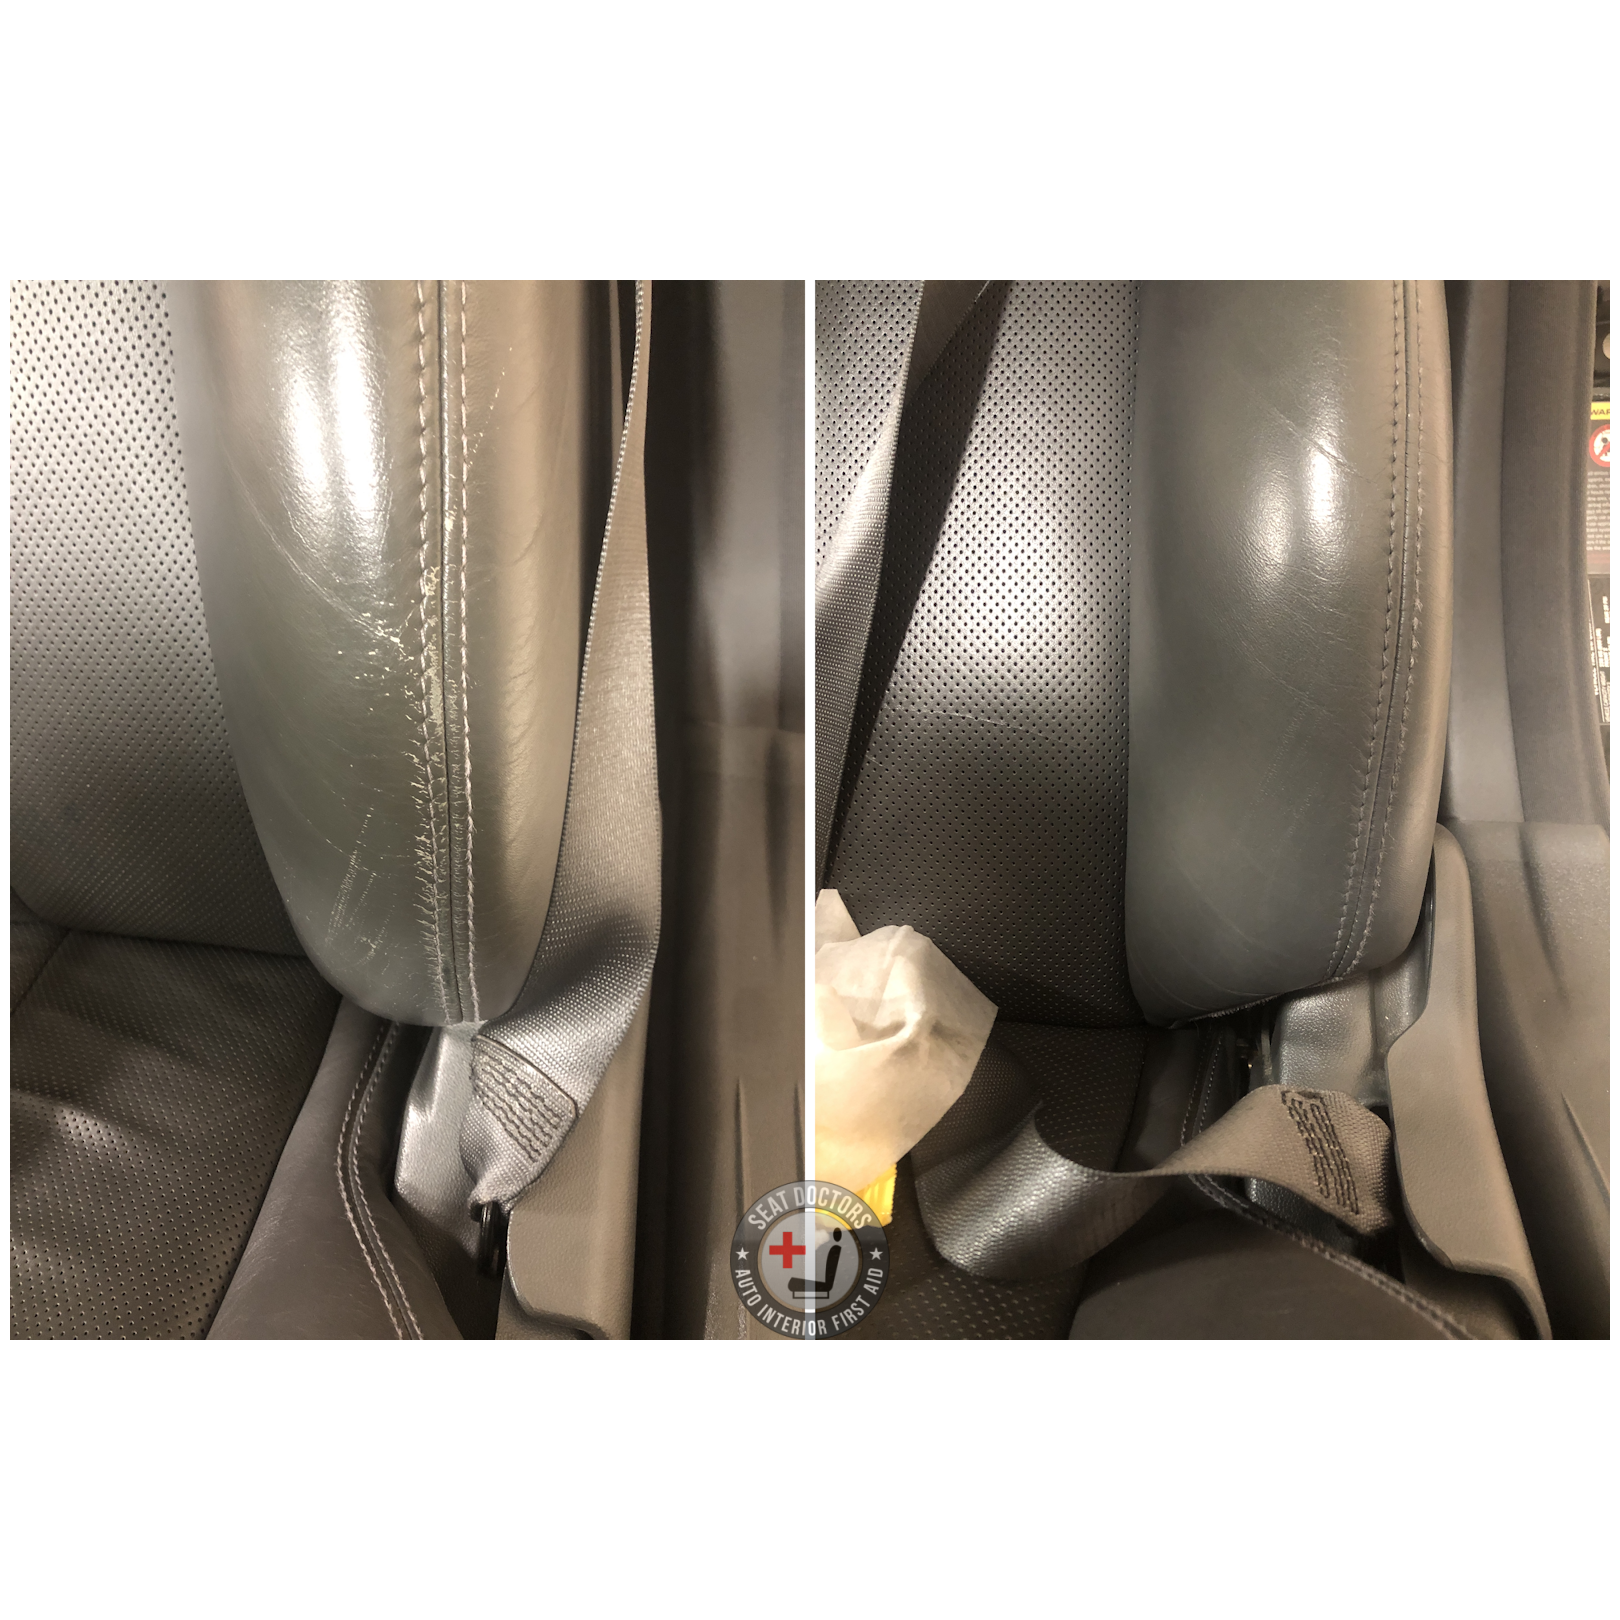 Aston Martin Leather Dye Colour Matched Leather Repair Paint - The Leather  Colour Doctor